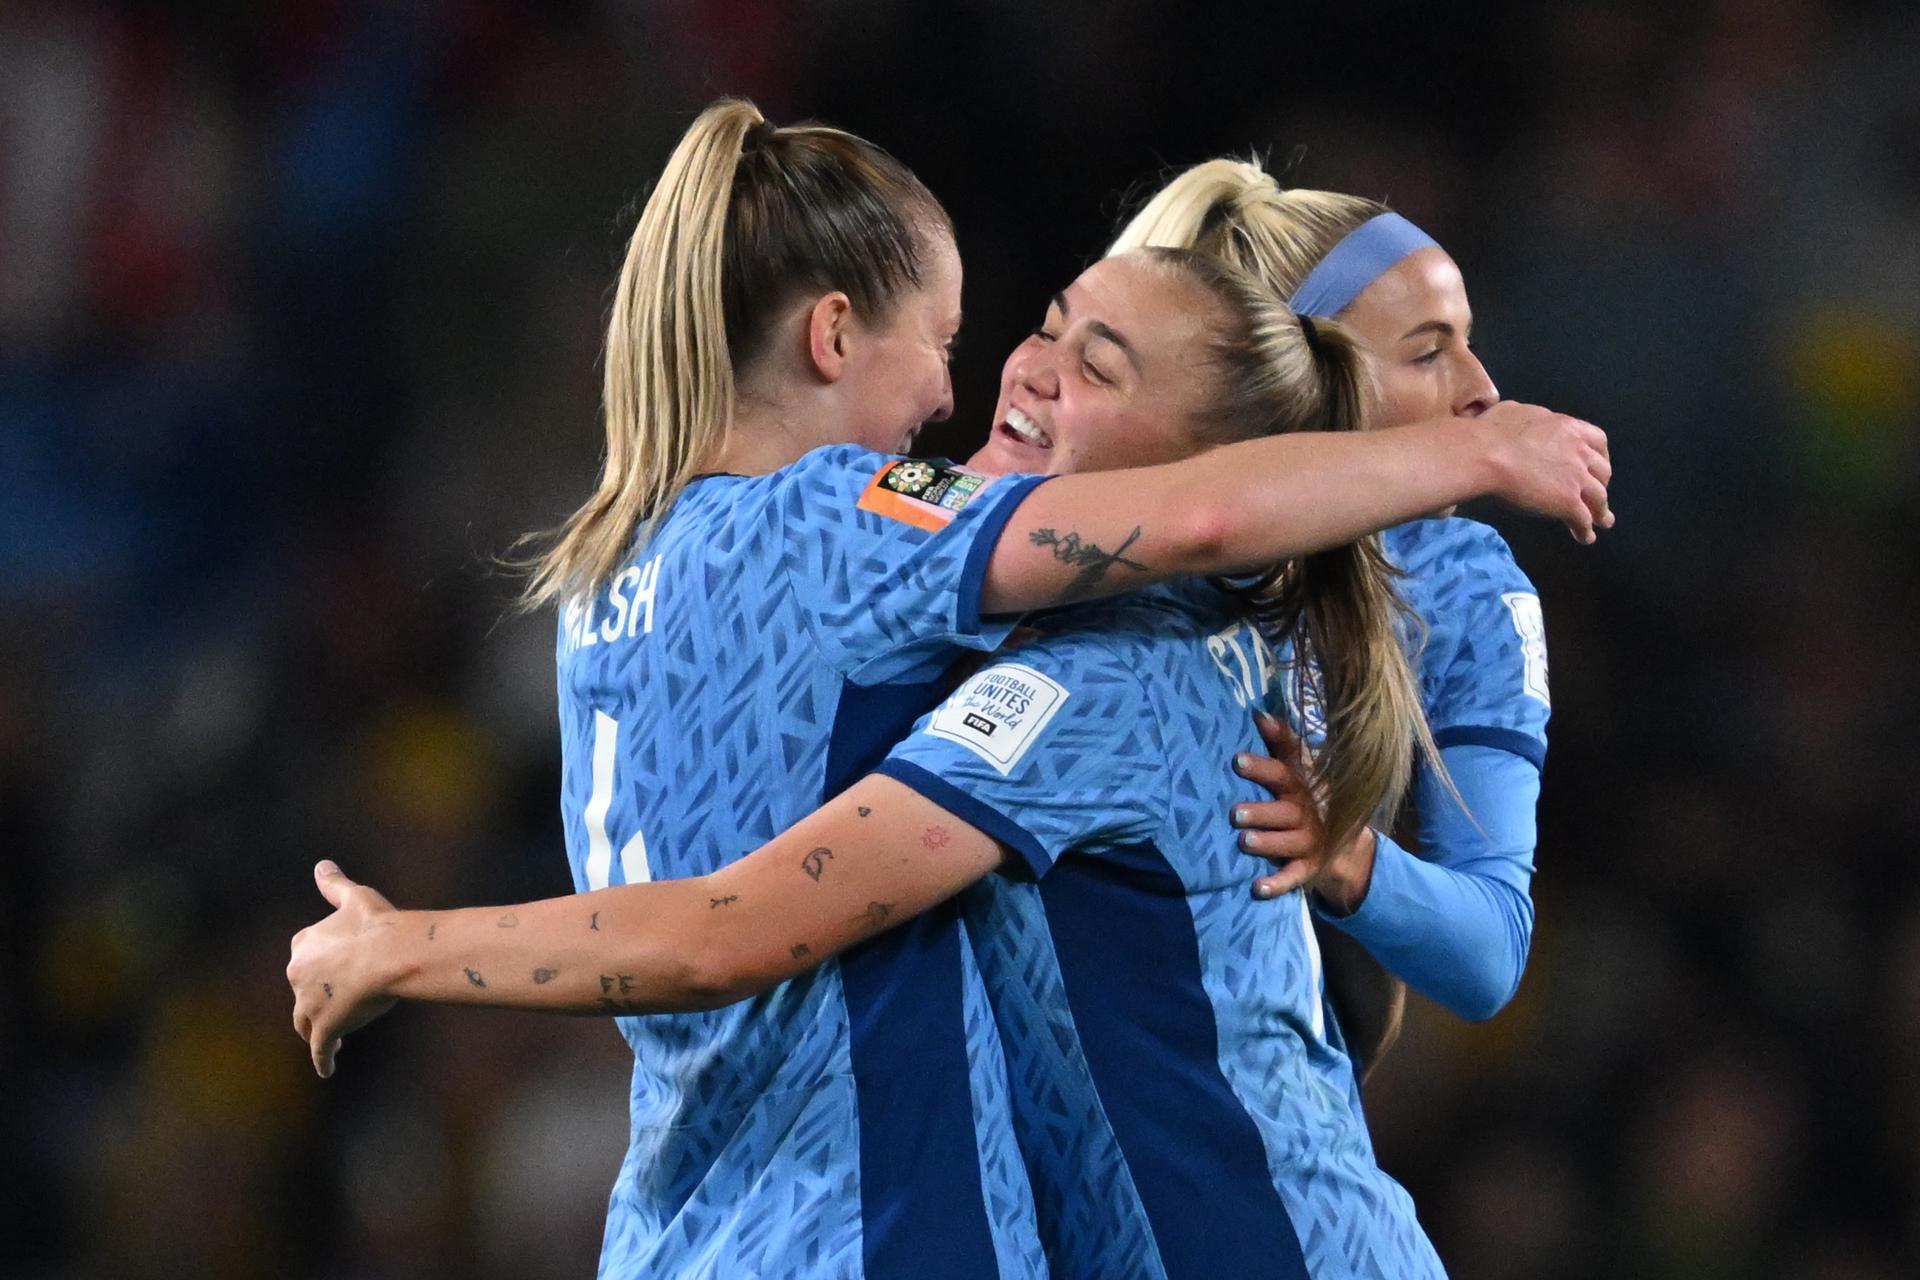 England's players celebrate winning the FIFA Women's World Cup semi-final soccer match between Australia and England in Sydney, Australia, 16 August 2023. EFE/EPA/DEAN LEWINS AUSTRALIA AND NEW ZEALAND OUT EDITORIAL USE ONLY